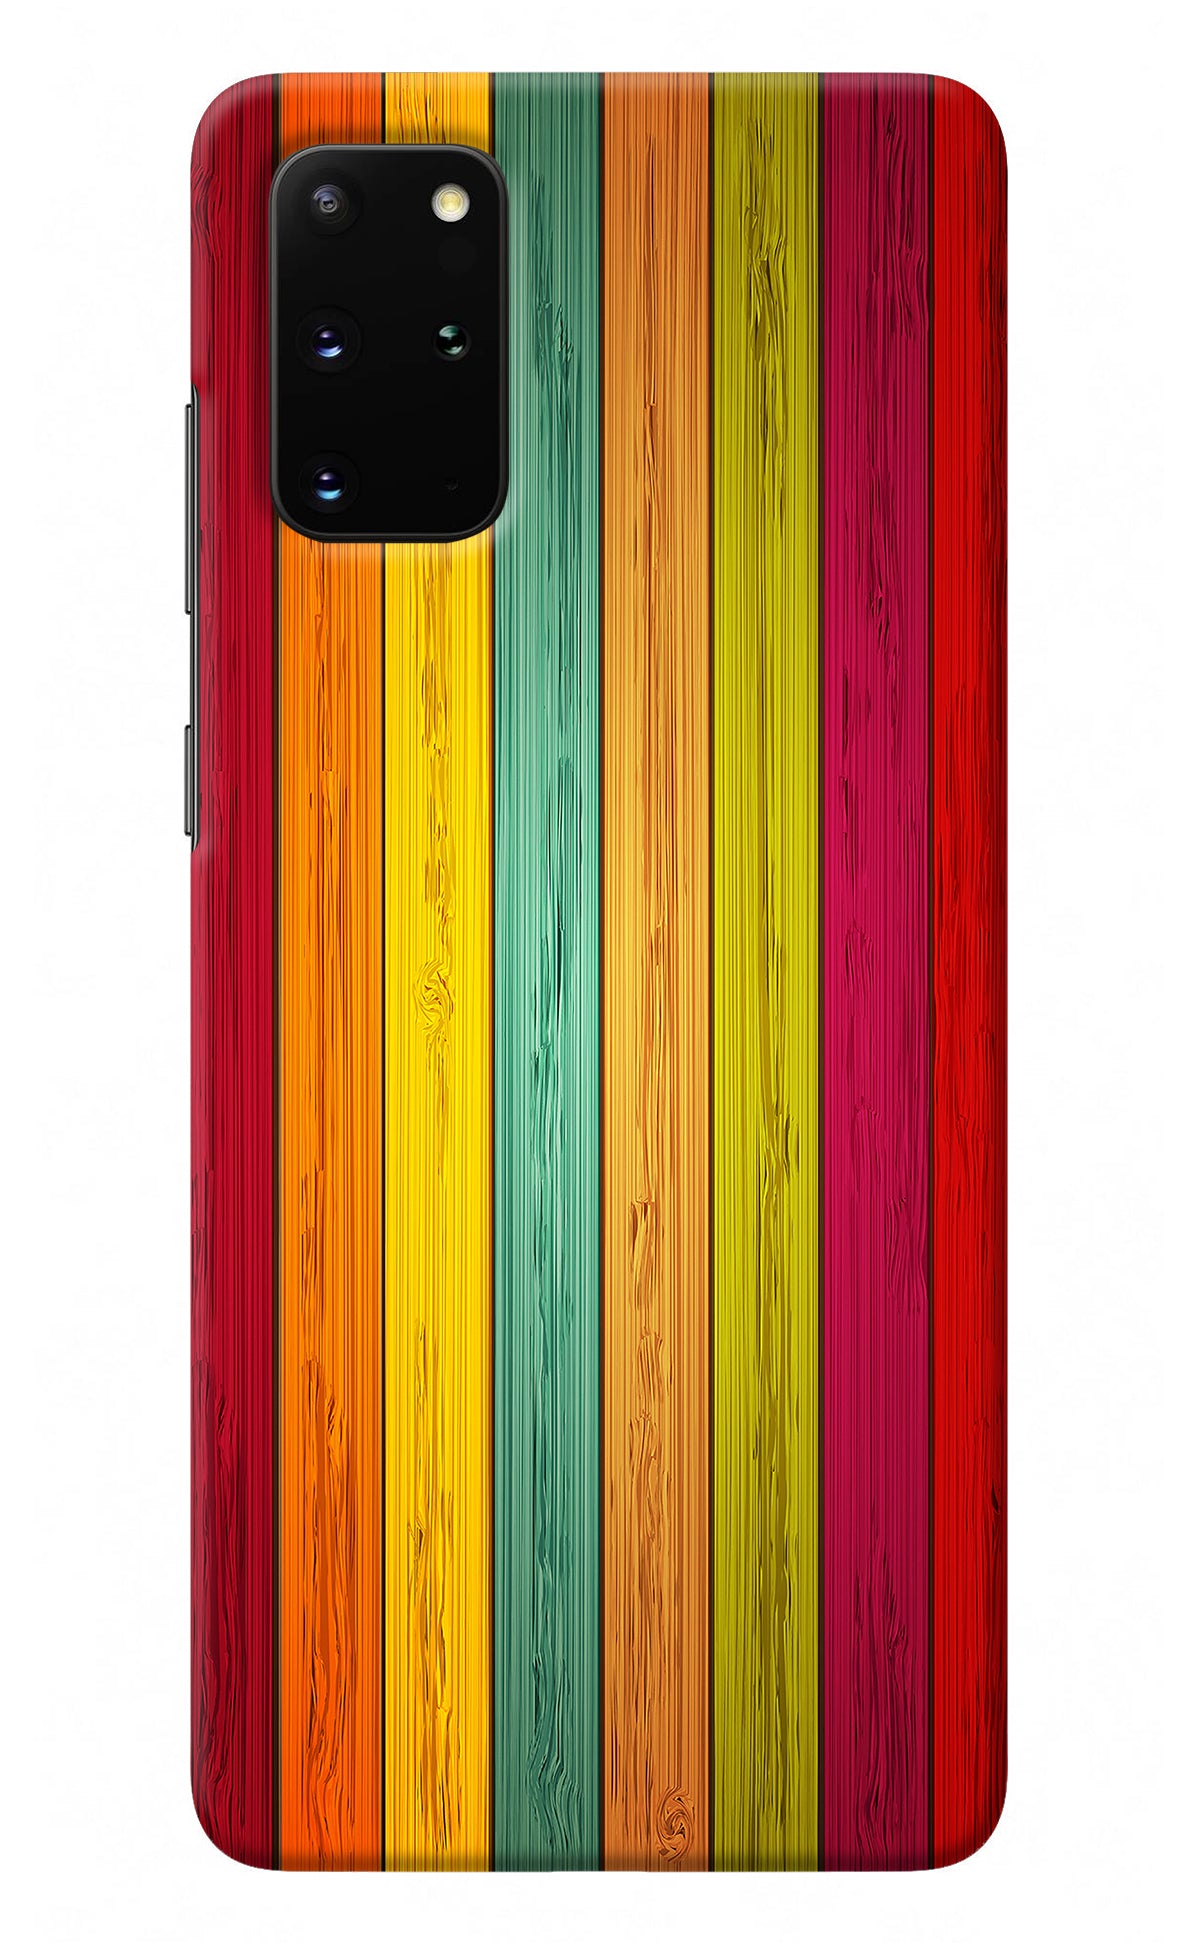 Multicolor Wooden Samsung S20 Plus Back Cover